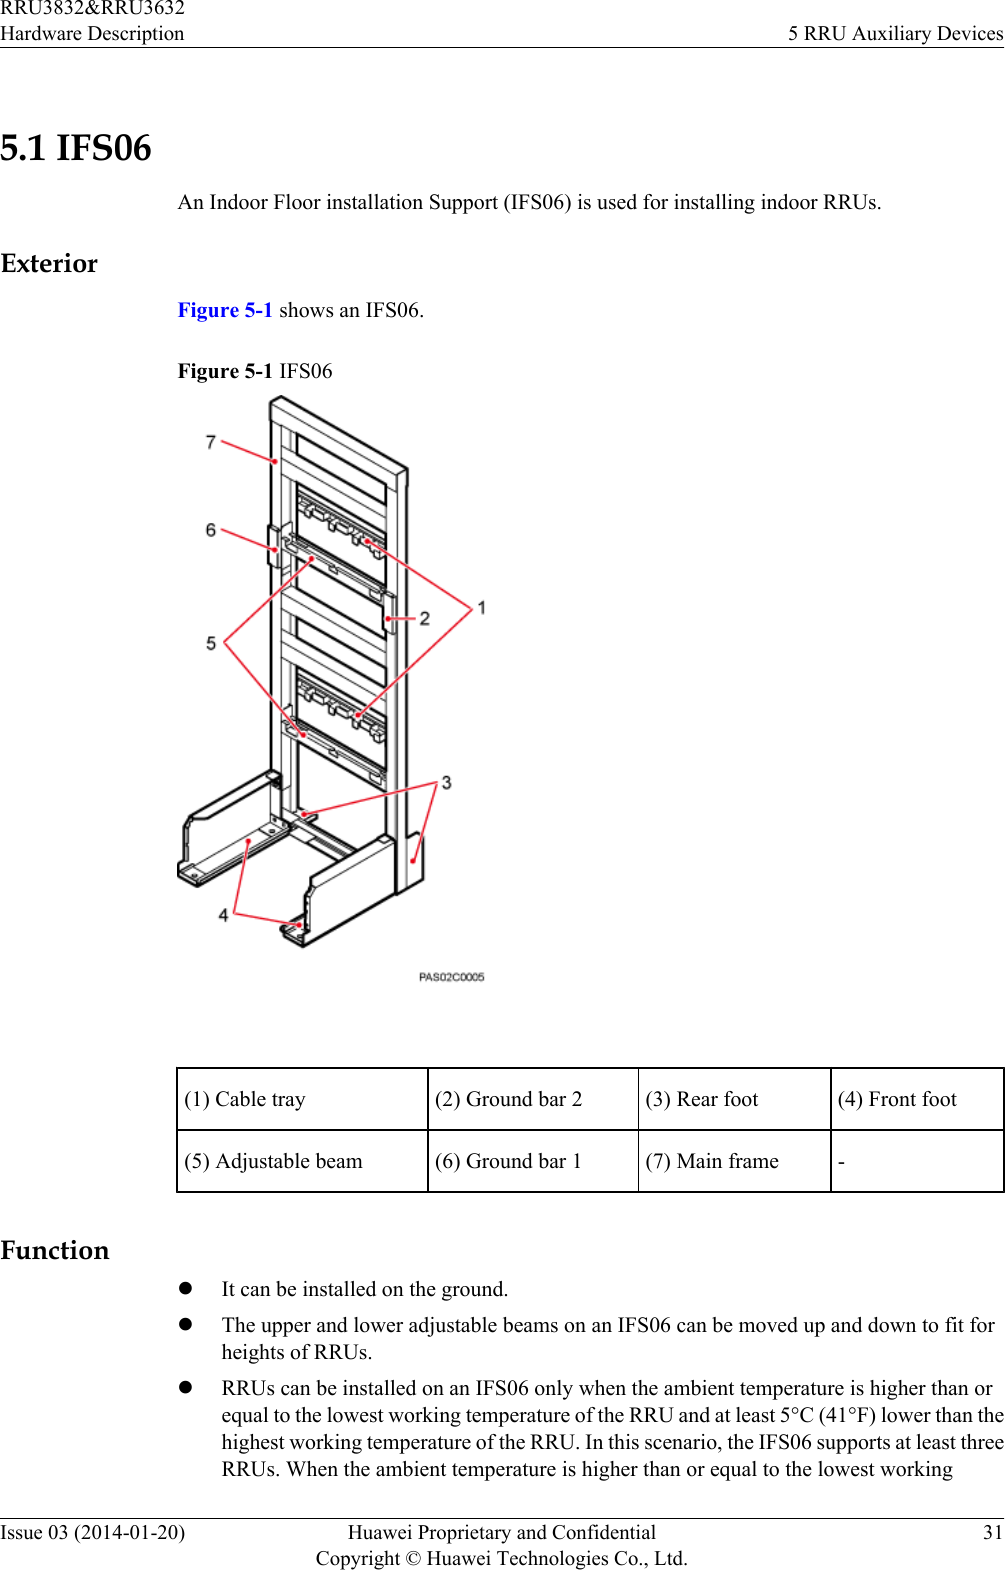 5.1 IFS06An Indoor Floor installation Support (IFS06) is used for installing indoor RRUs.ExteriorFigure 5-1 shows an IFS06.Figure 5-1 IFS06 (1) Cable tray (2) Ground bar 2 (3) Rear foot (4) Front foot(5) Adjustable beam (6) Ground bar 1 (7) Main frame -FunctionlIt can be installed on the ground.lThe upper and lower adjustable beams on an IFS06 can be moved up and down to fit forheights of RRUs.lRRUs can be installed on an IFS06 only when the ambient temperature is higher than orequal to the lowest working temperature of the RRU and at least 5°C (41°F) lower than thehighest working temperature of the RRU. In this scenario, the IFS06 supports at least threeRRUs. When the ambient temperature is higher than or equal to the lowest workingRRU3832&amp;RRU3632Hardware Description 5 RRU Auxiliary DevicesIssue 03 (2014-01-20) Huawei Proprietary and ConfidentialCopyright © Huawei Technologies Co., Ltd.31